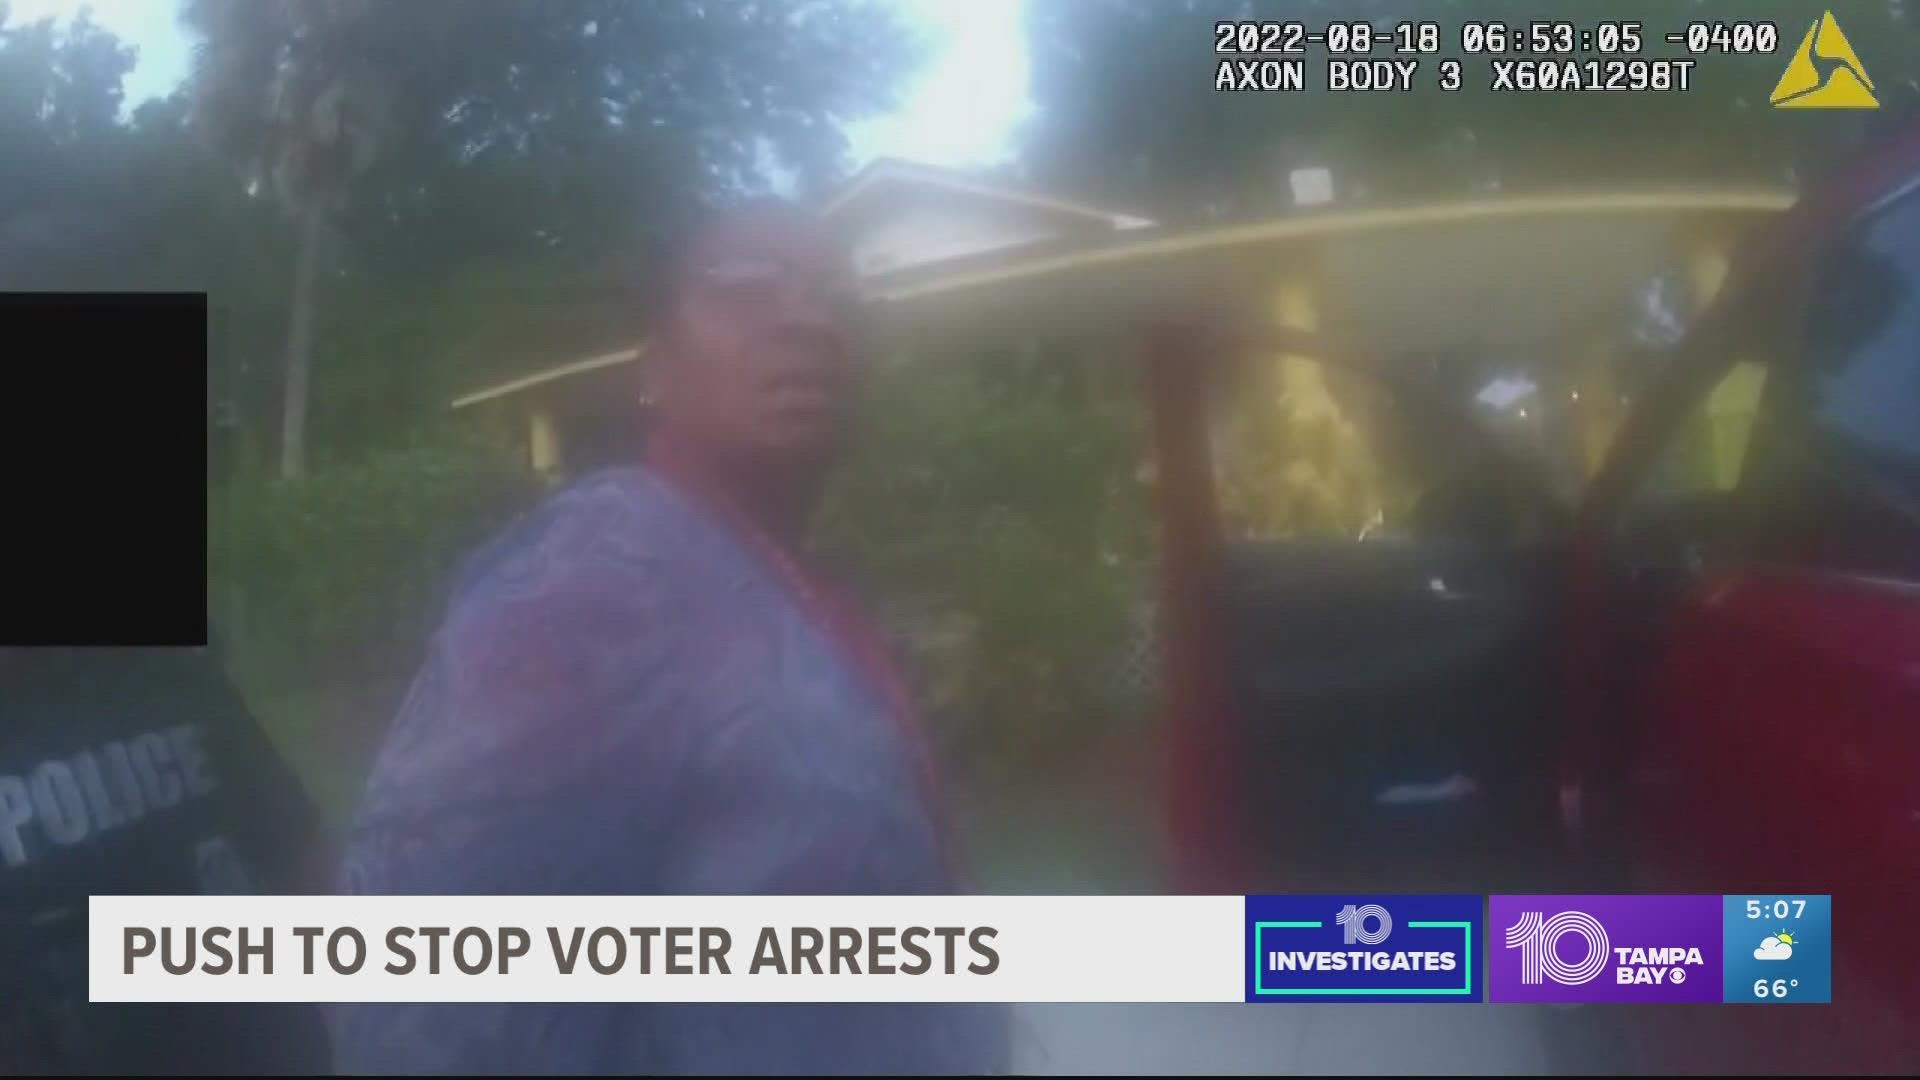 “Why would y’all let me vote if I wasn’t able to vote?” Tony Patterson asked as an officer took him into custody.